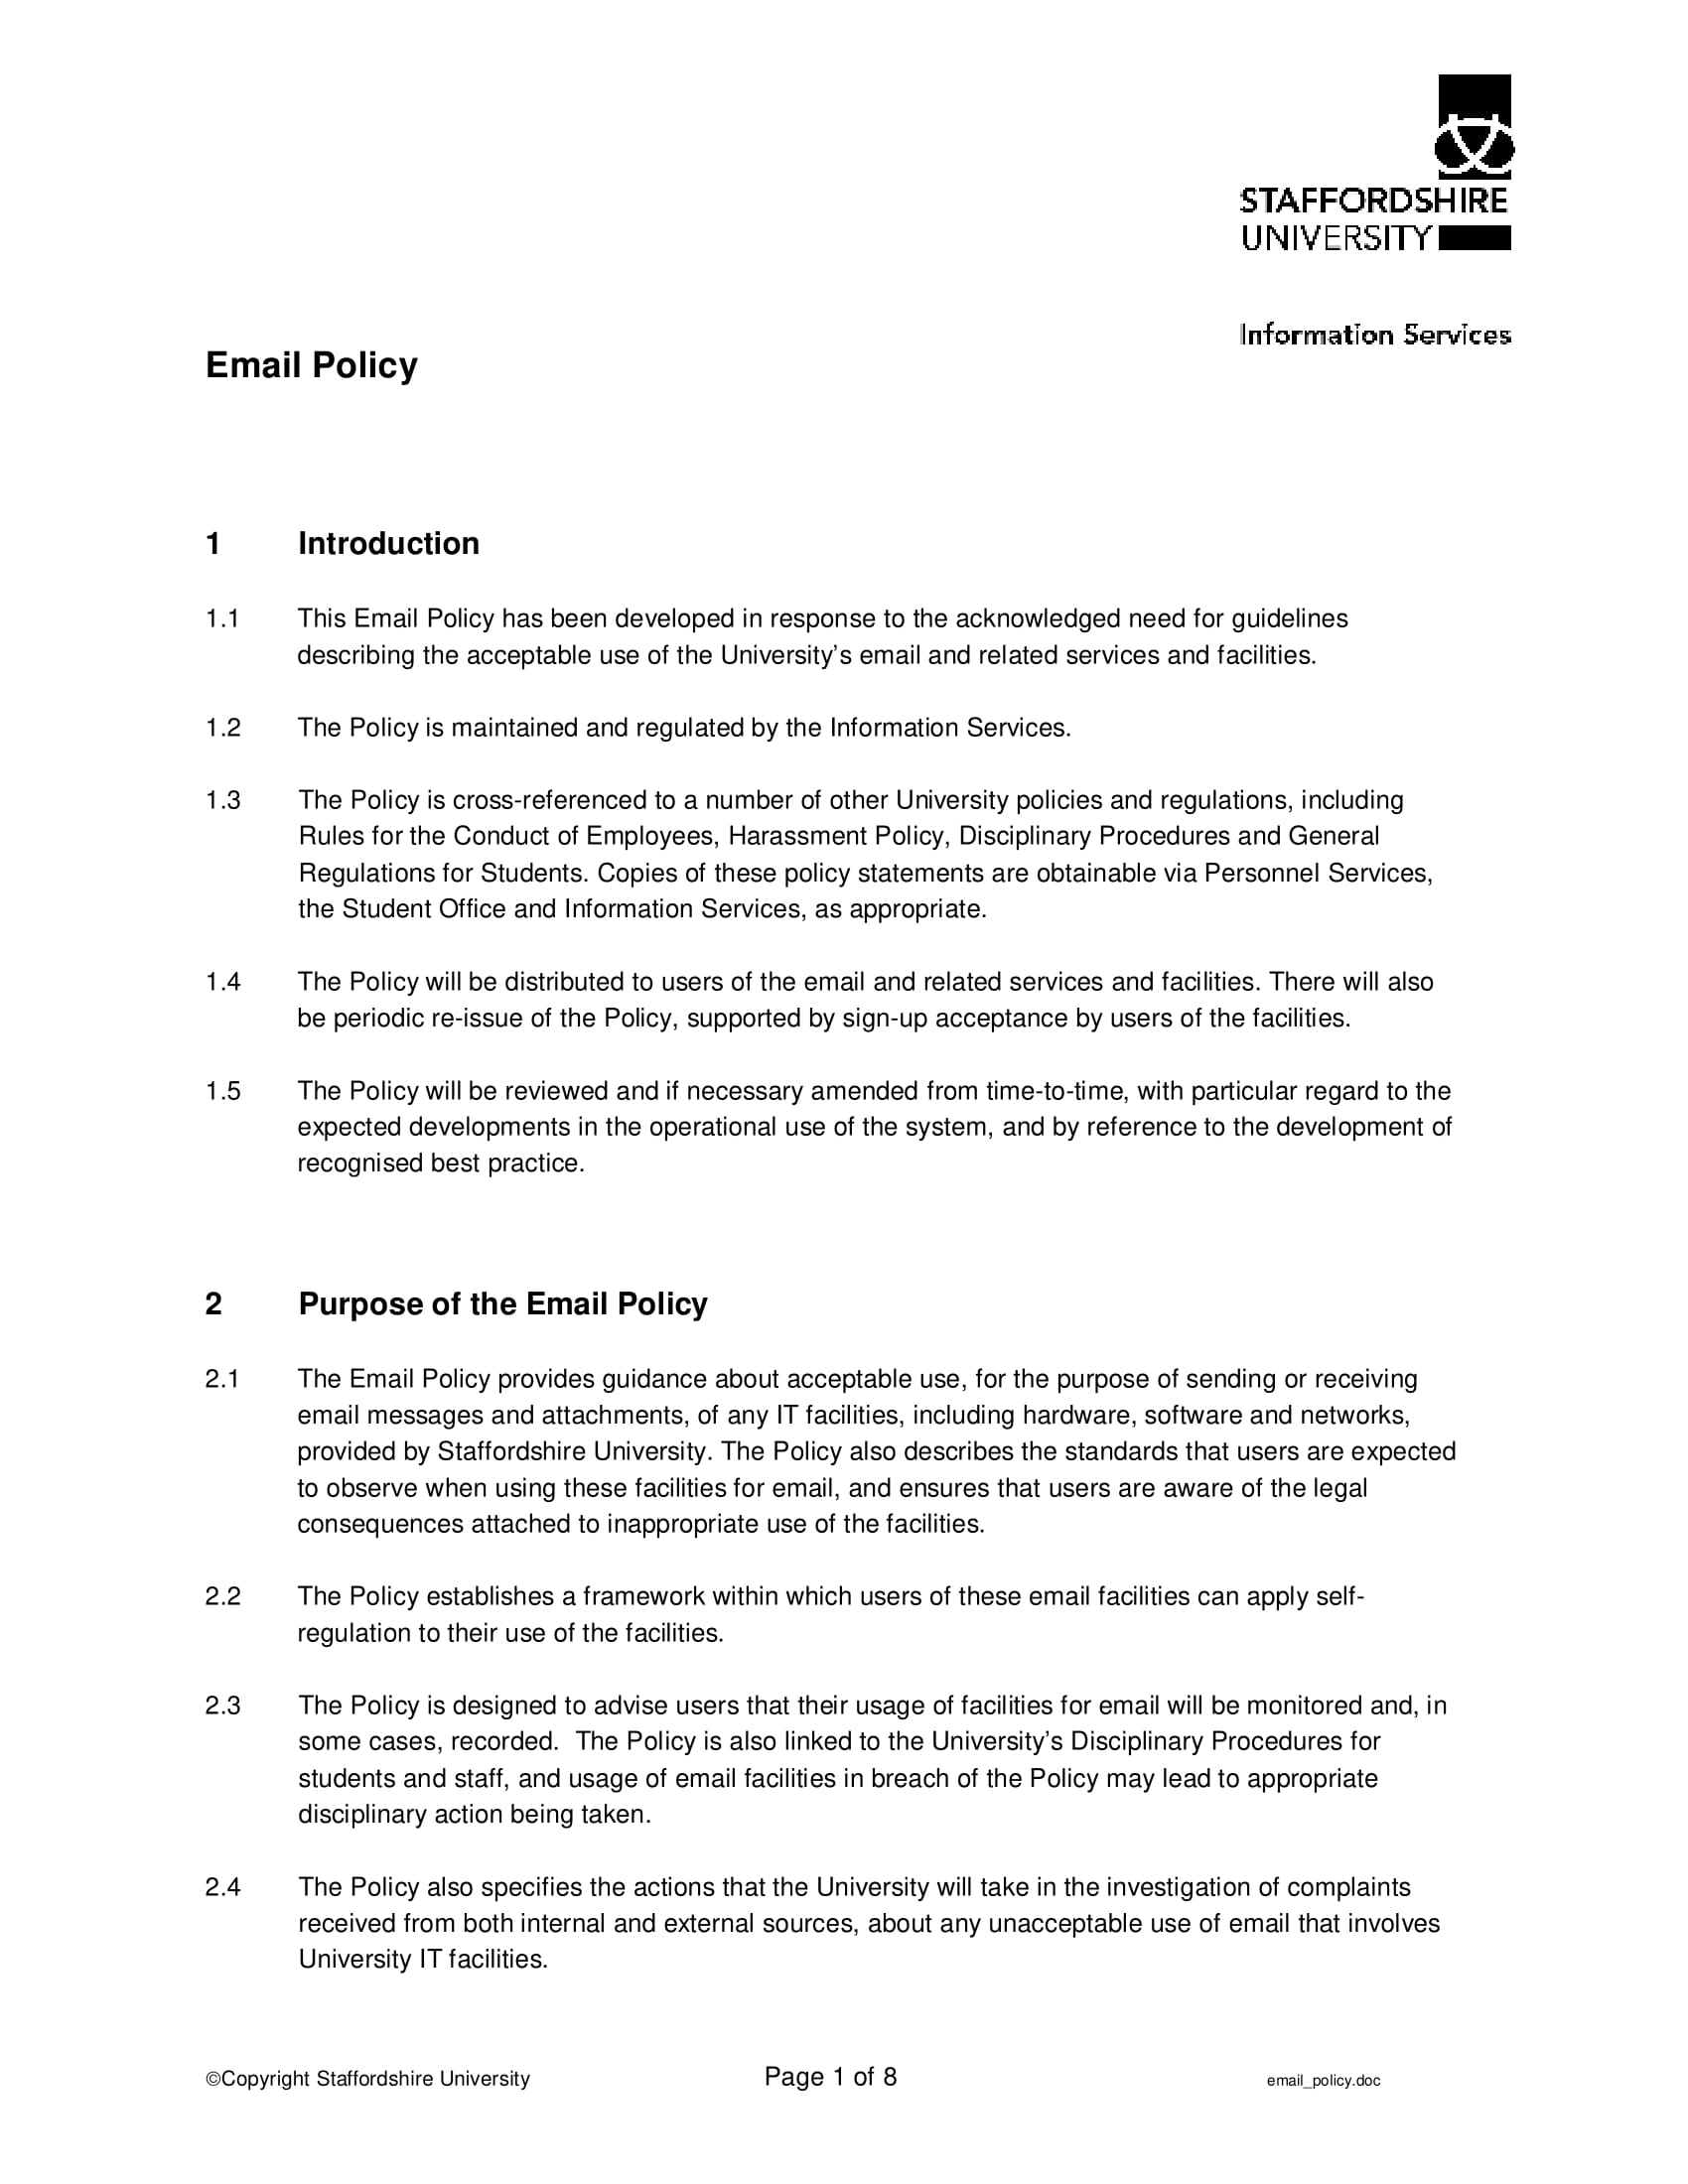 example of rules policies regulations for communication in a workplace